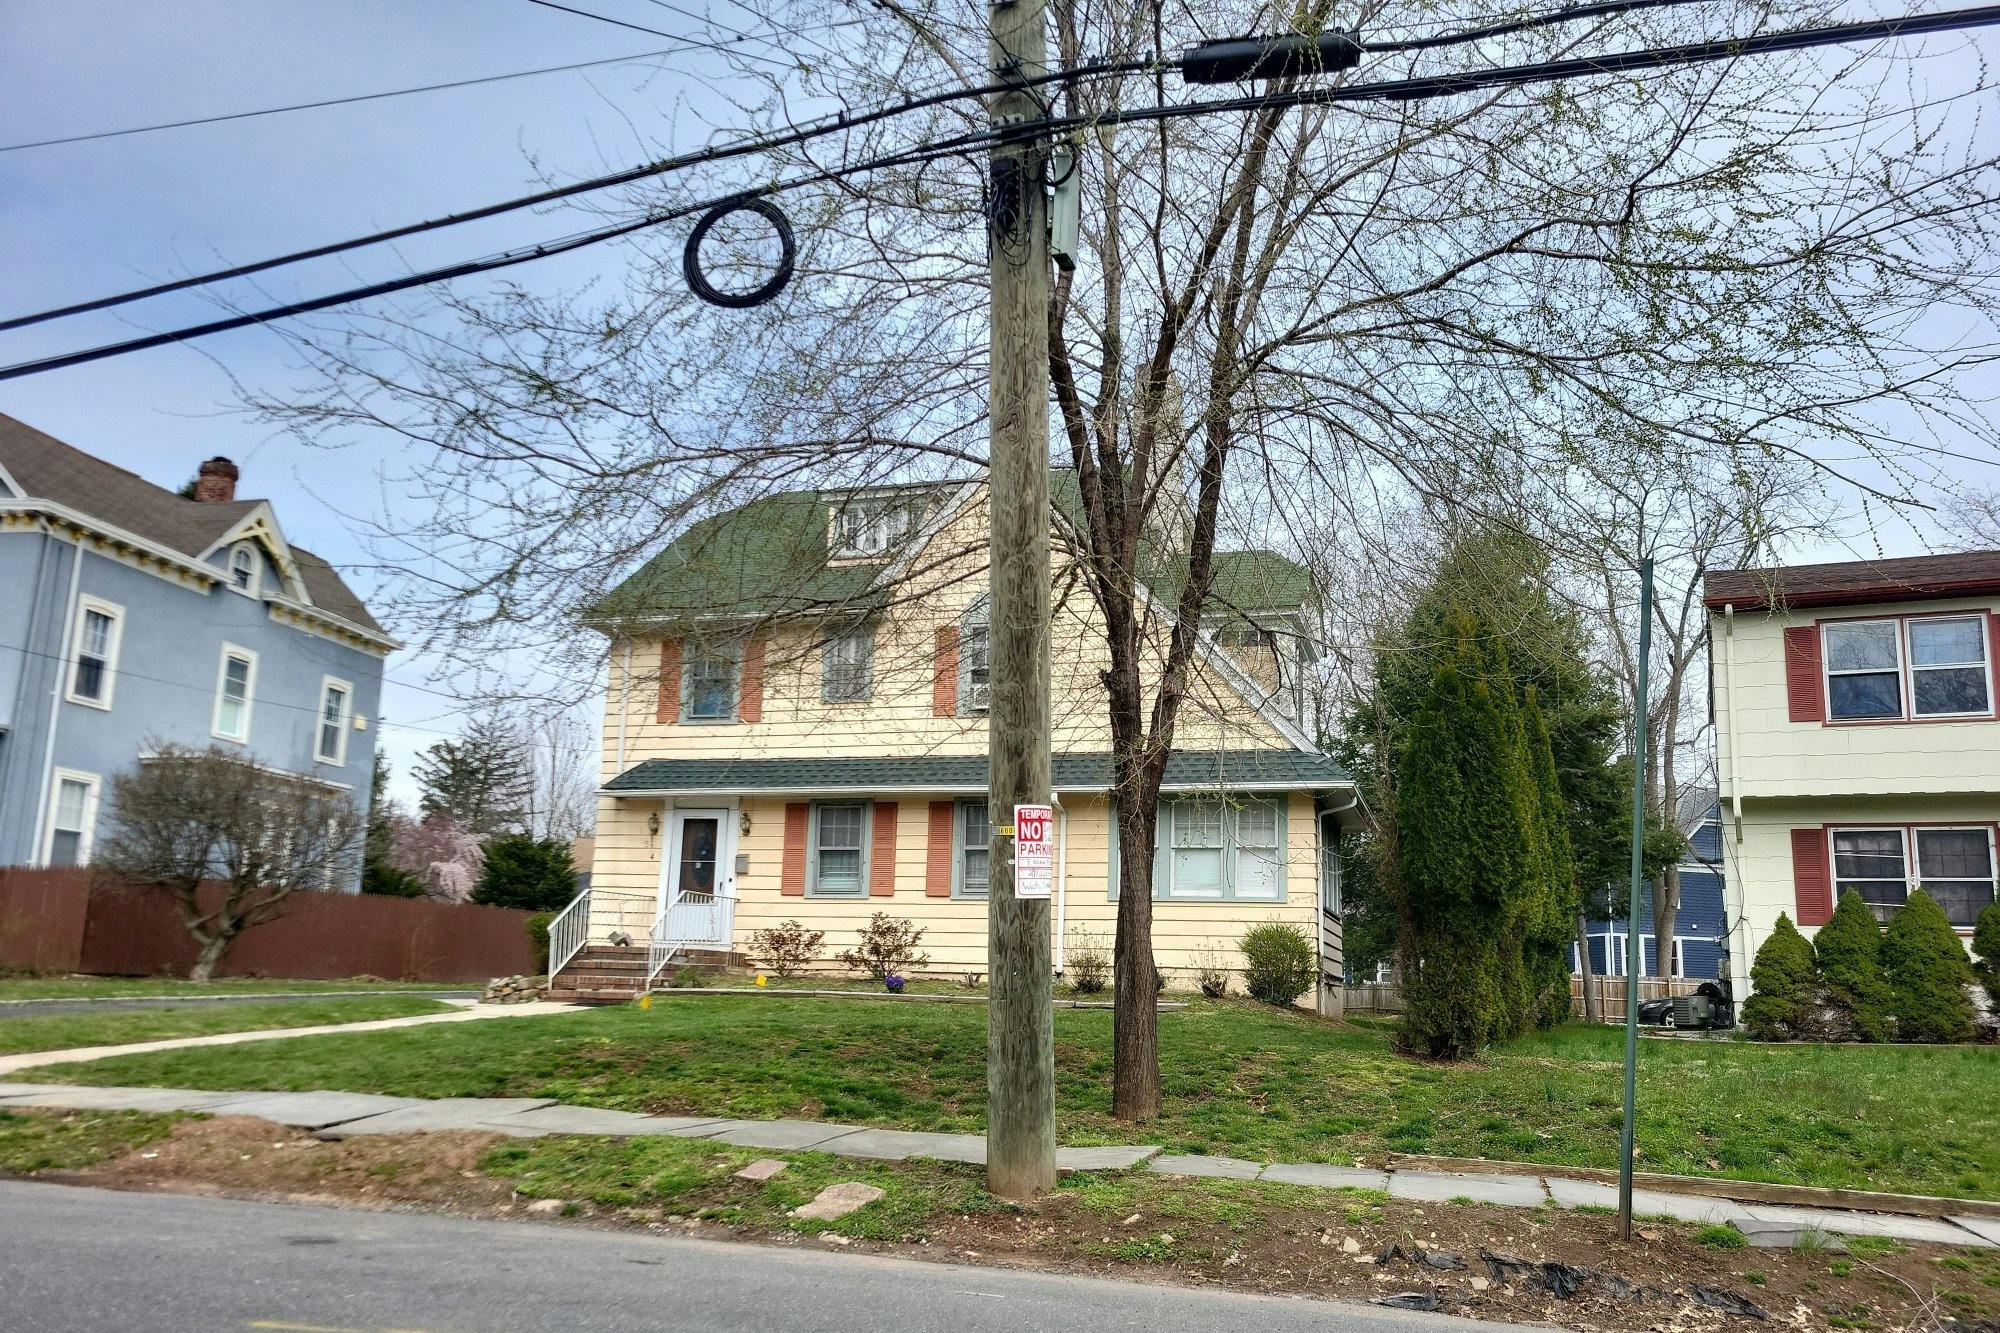 Sycamore Ave, North Plainfield, NJ 07060 #1